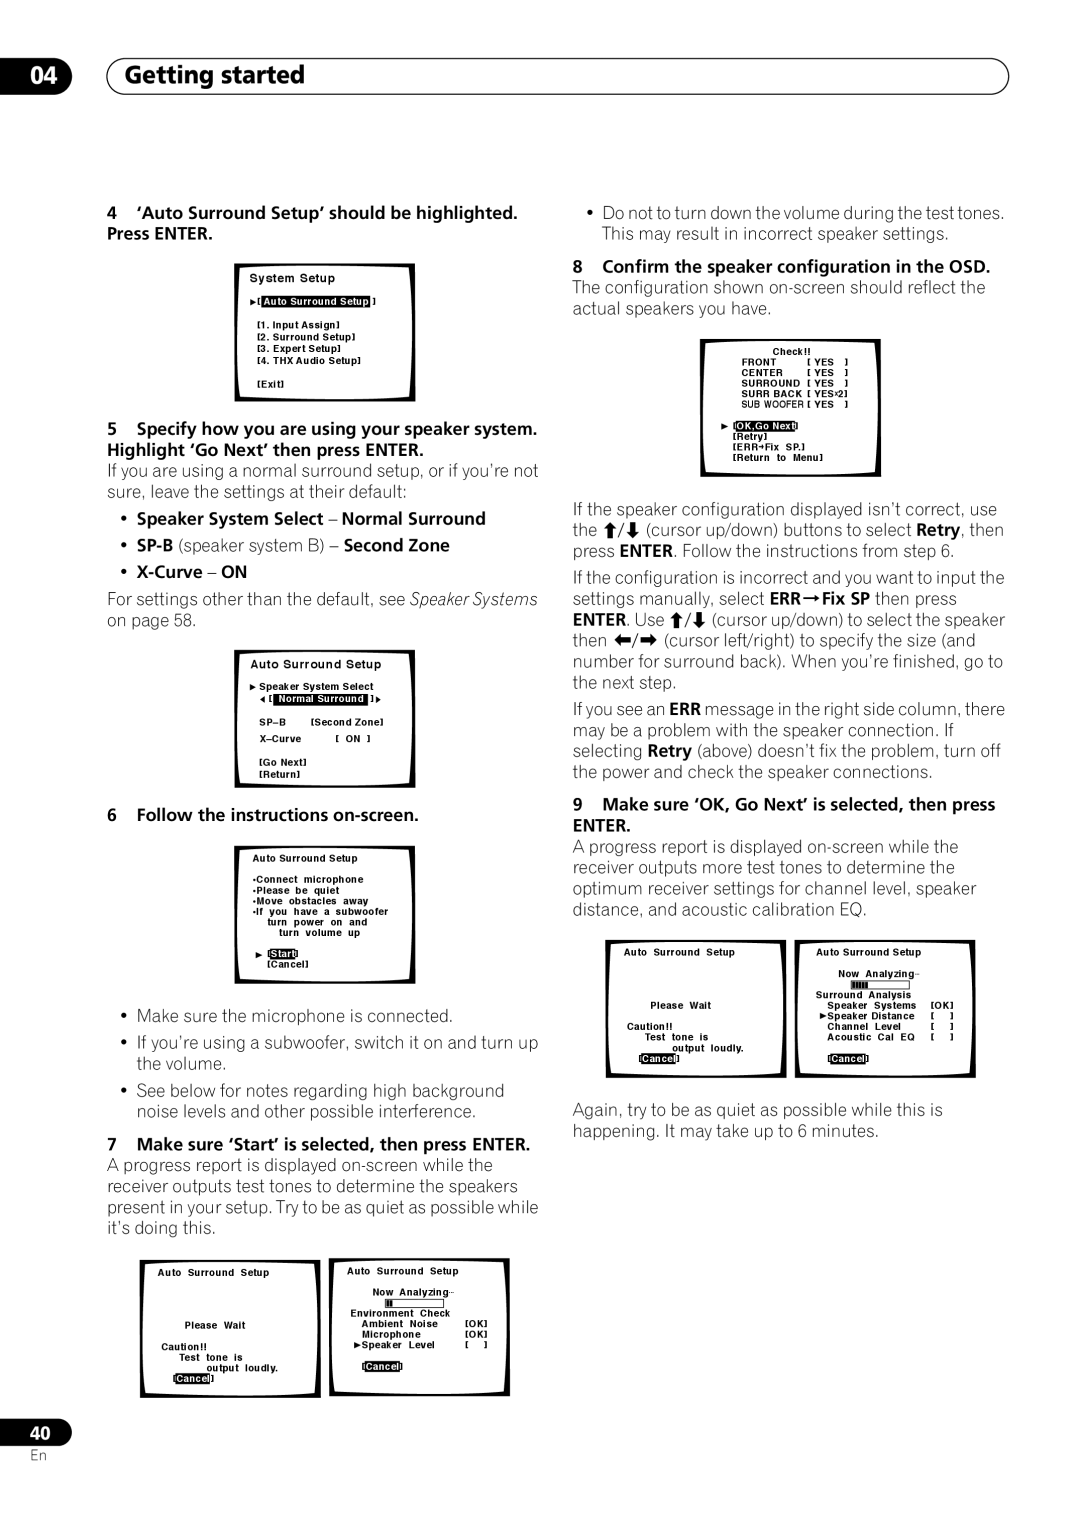 Pioneer VSX-59TXi operating instructions 04Getting started 